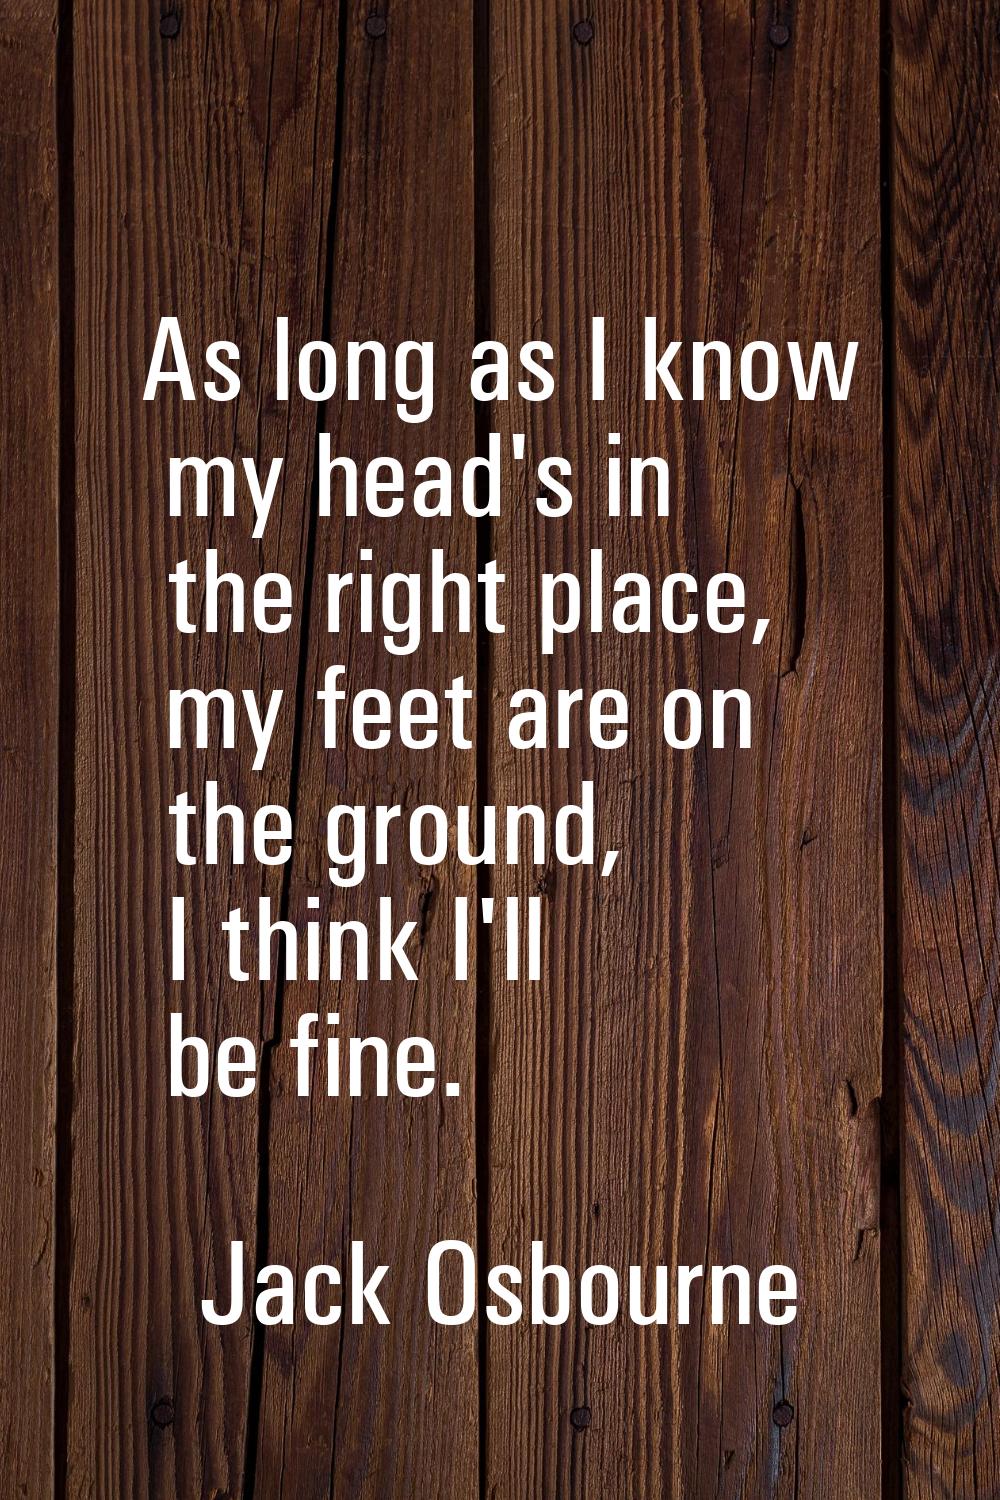 As long as I know my head's in the right place, my feet are on the ground, I think I'll be fine.